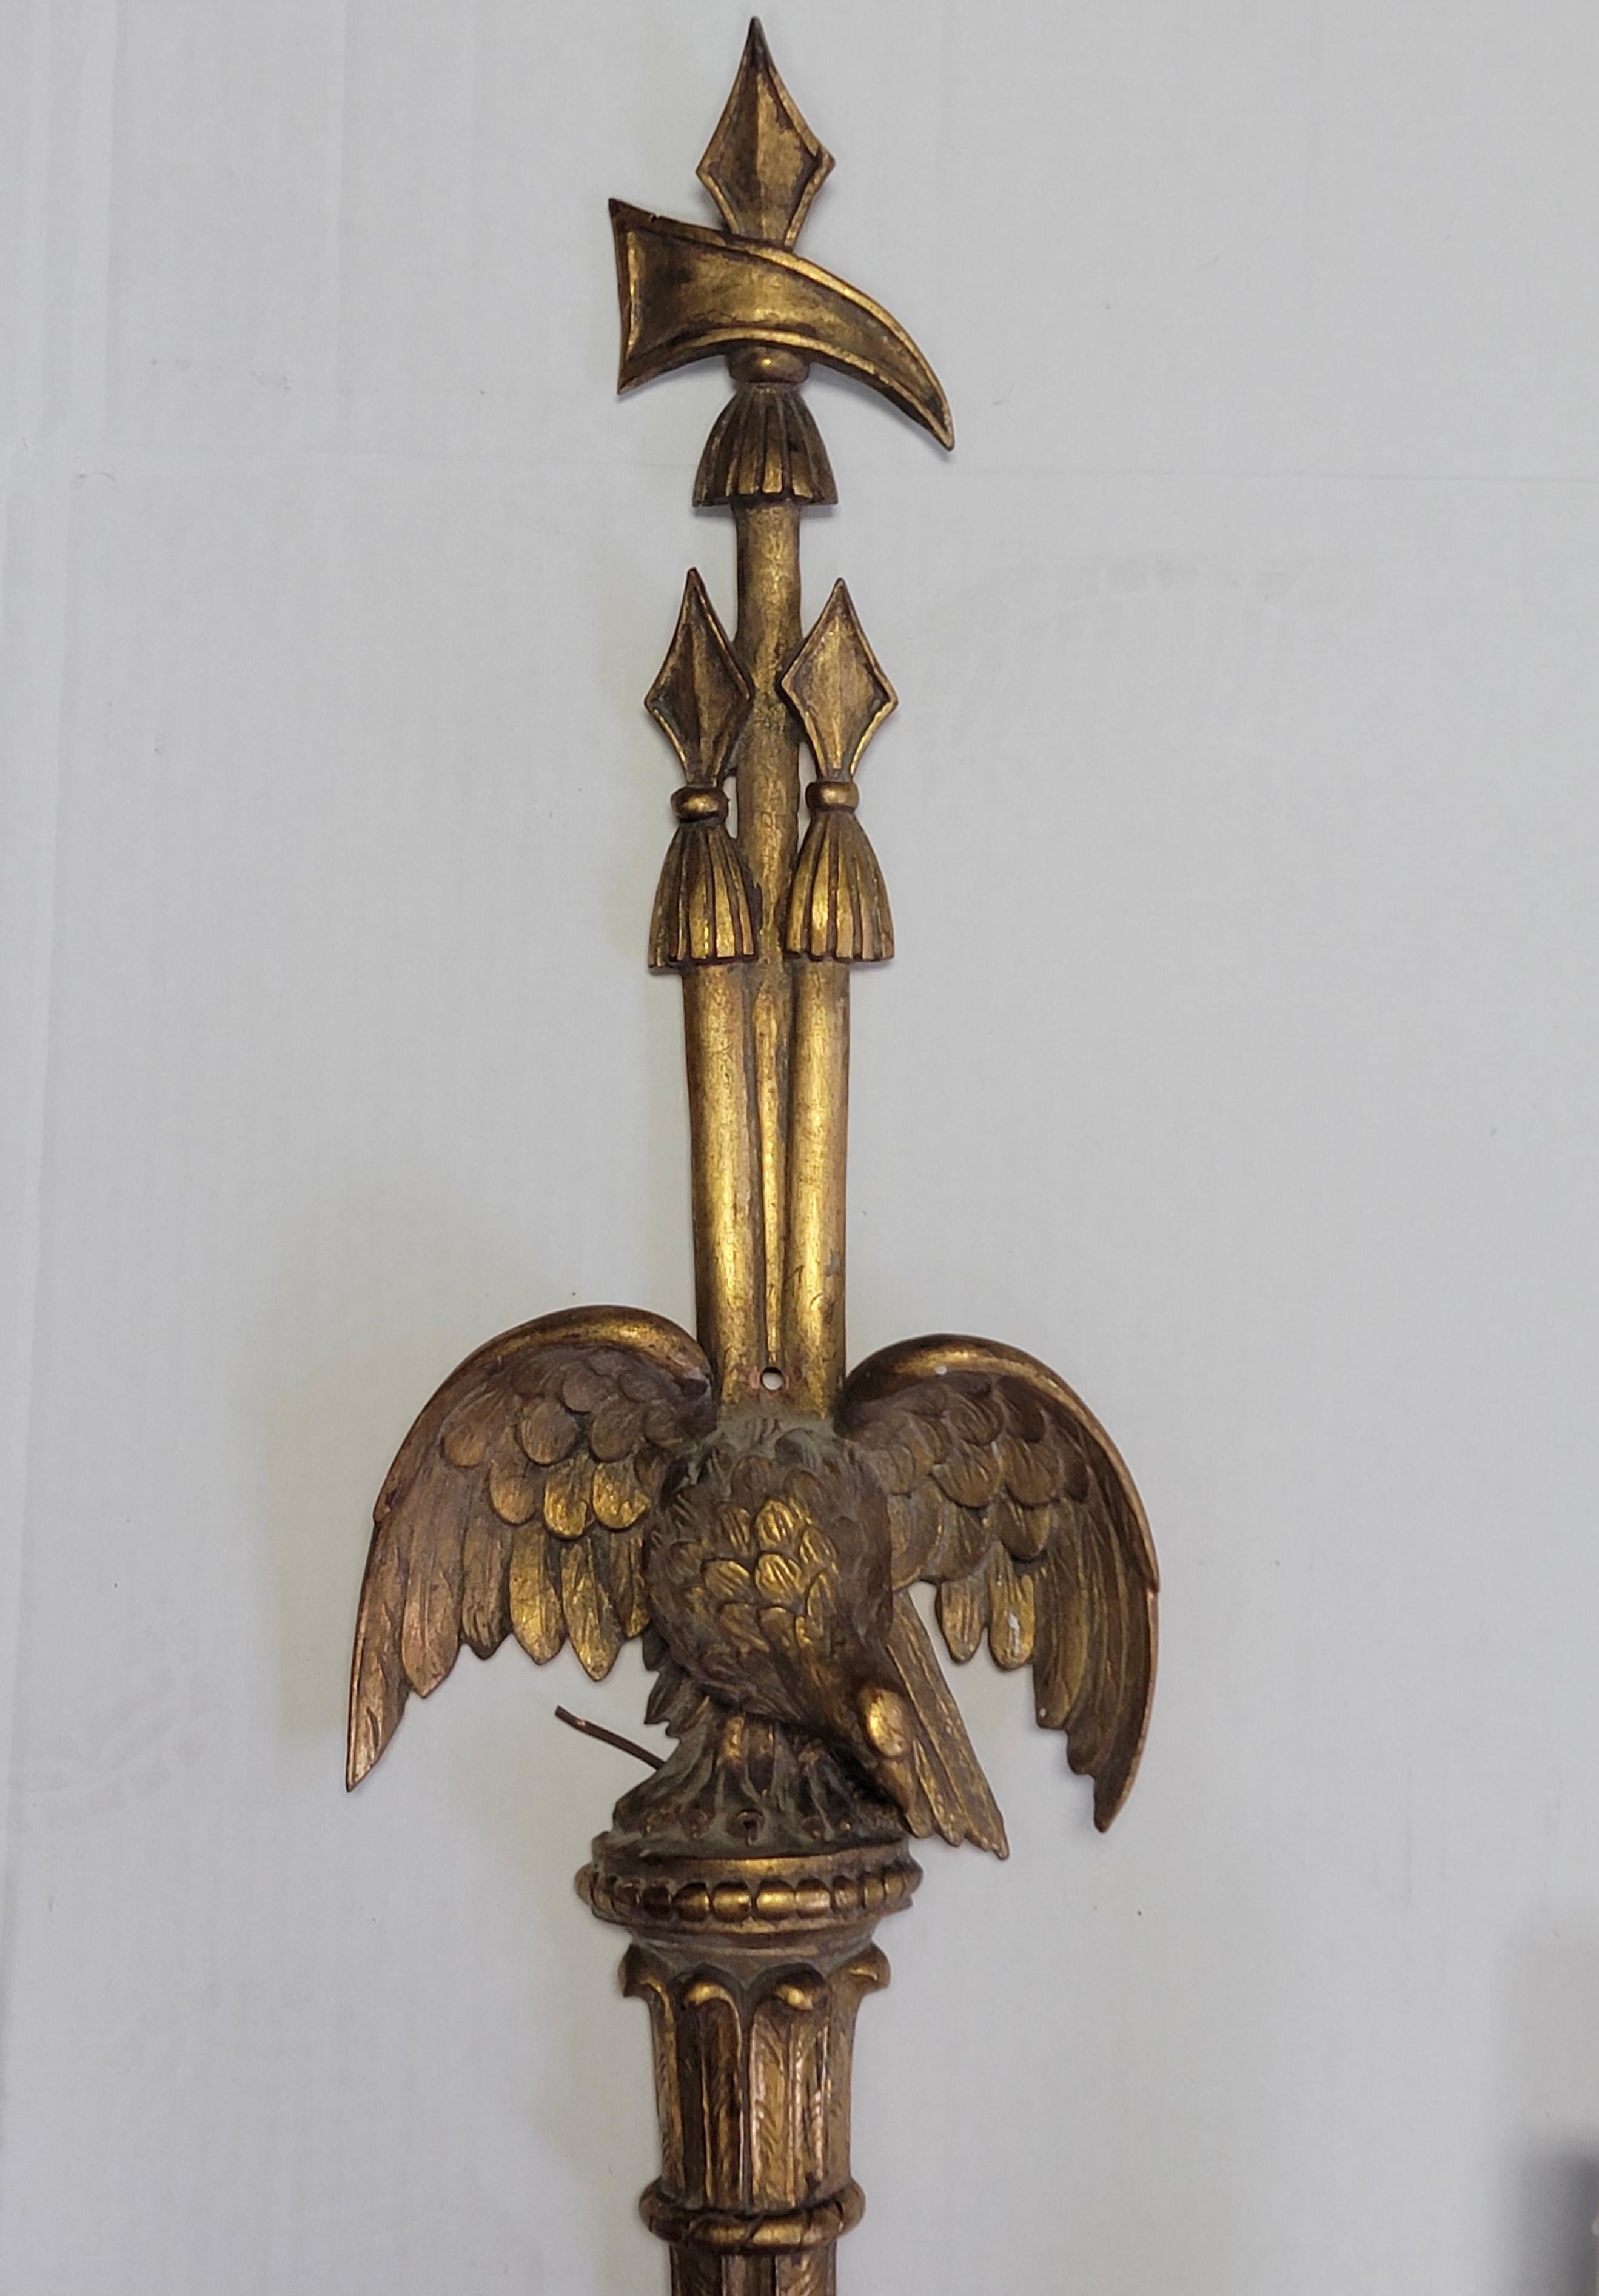 These have a timeless elegance. It is a large scale pair of carved giltwood sconces with Federal styling. The facing eagles are adorned with axes and arrows. The wiring and candle covers are new. They most likely date to the later part of the 20th